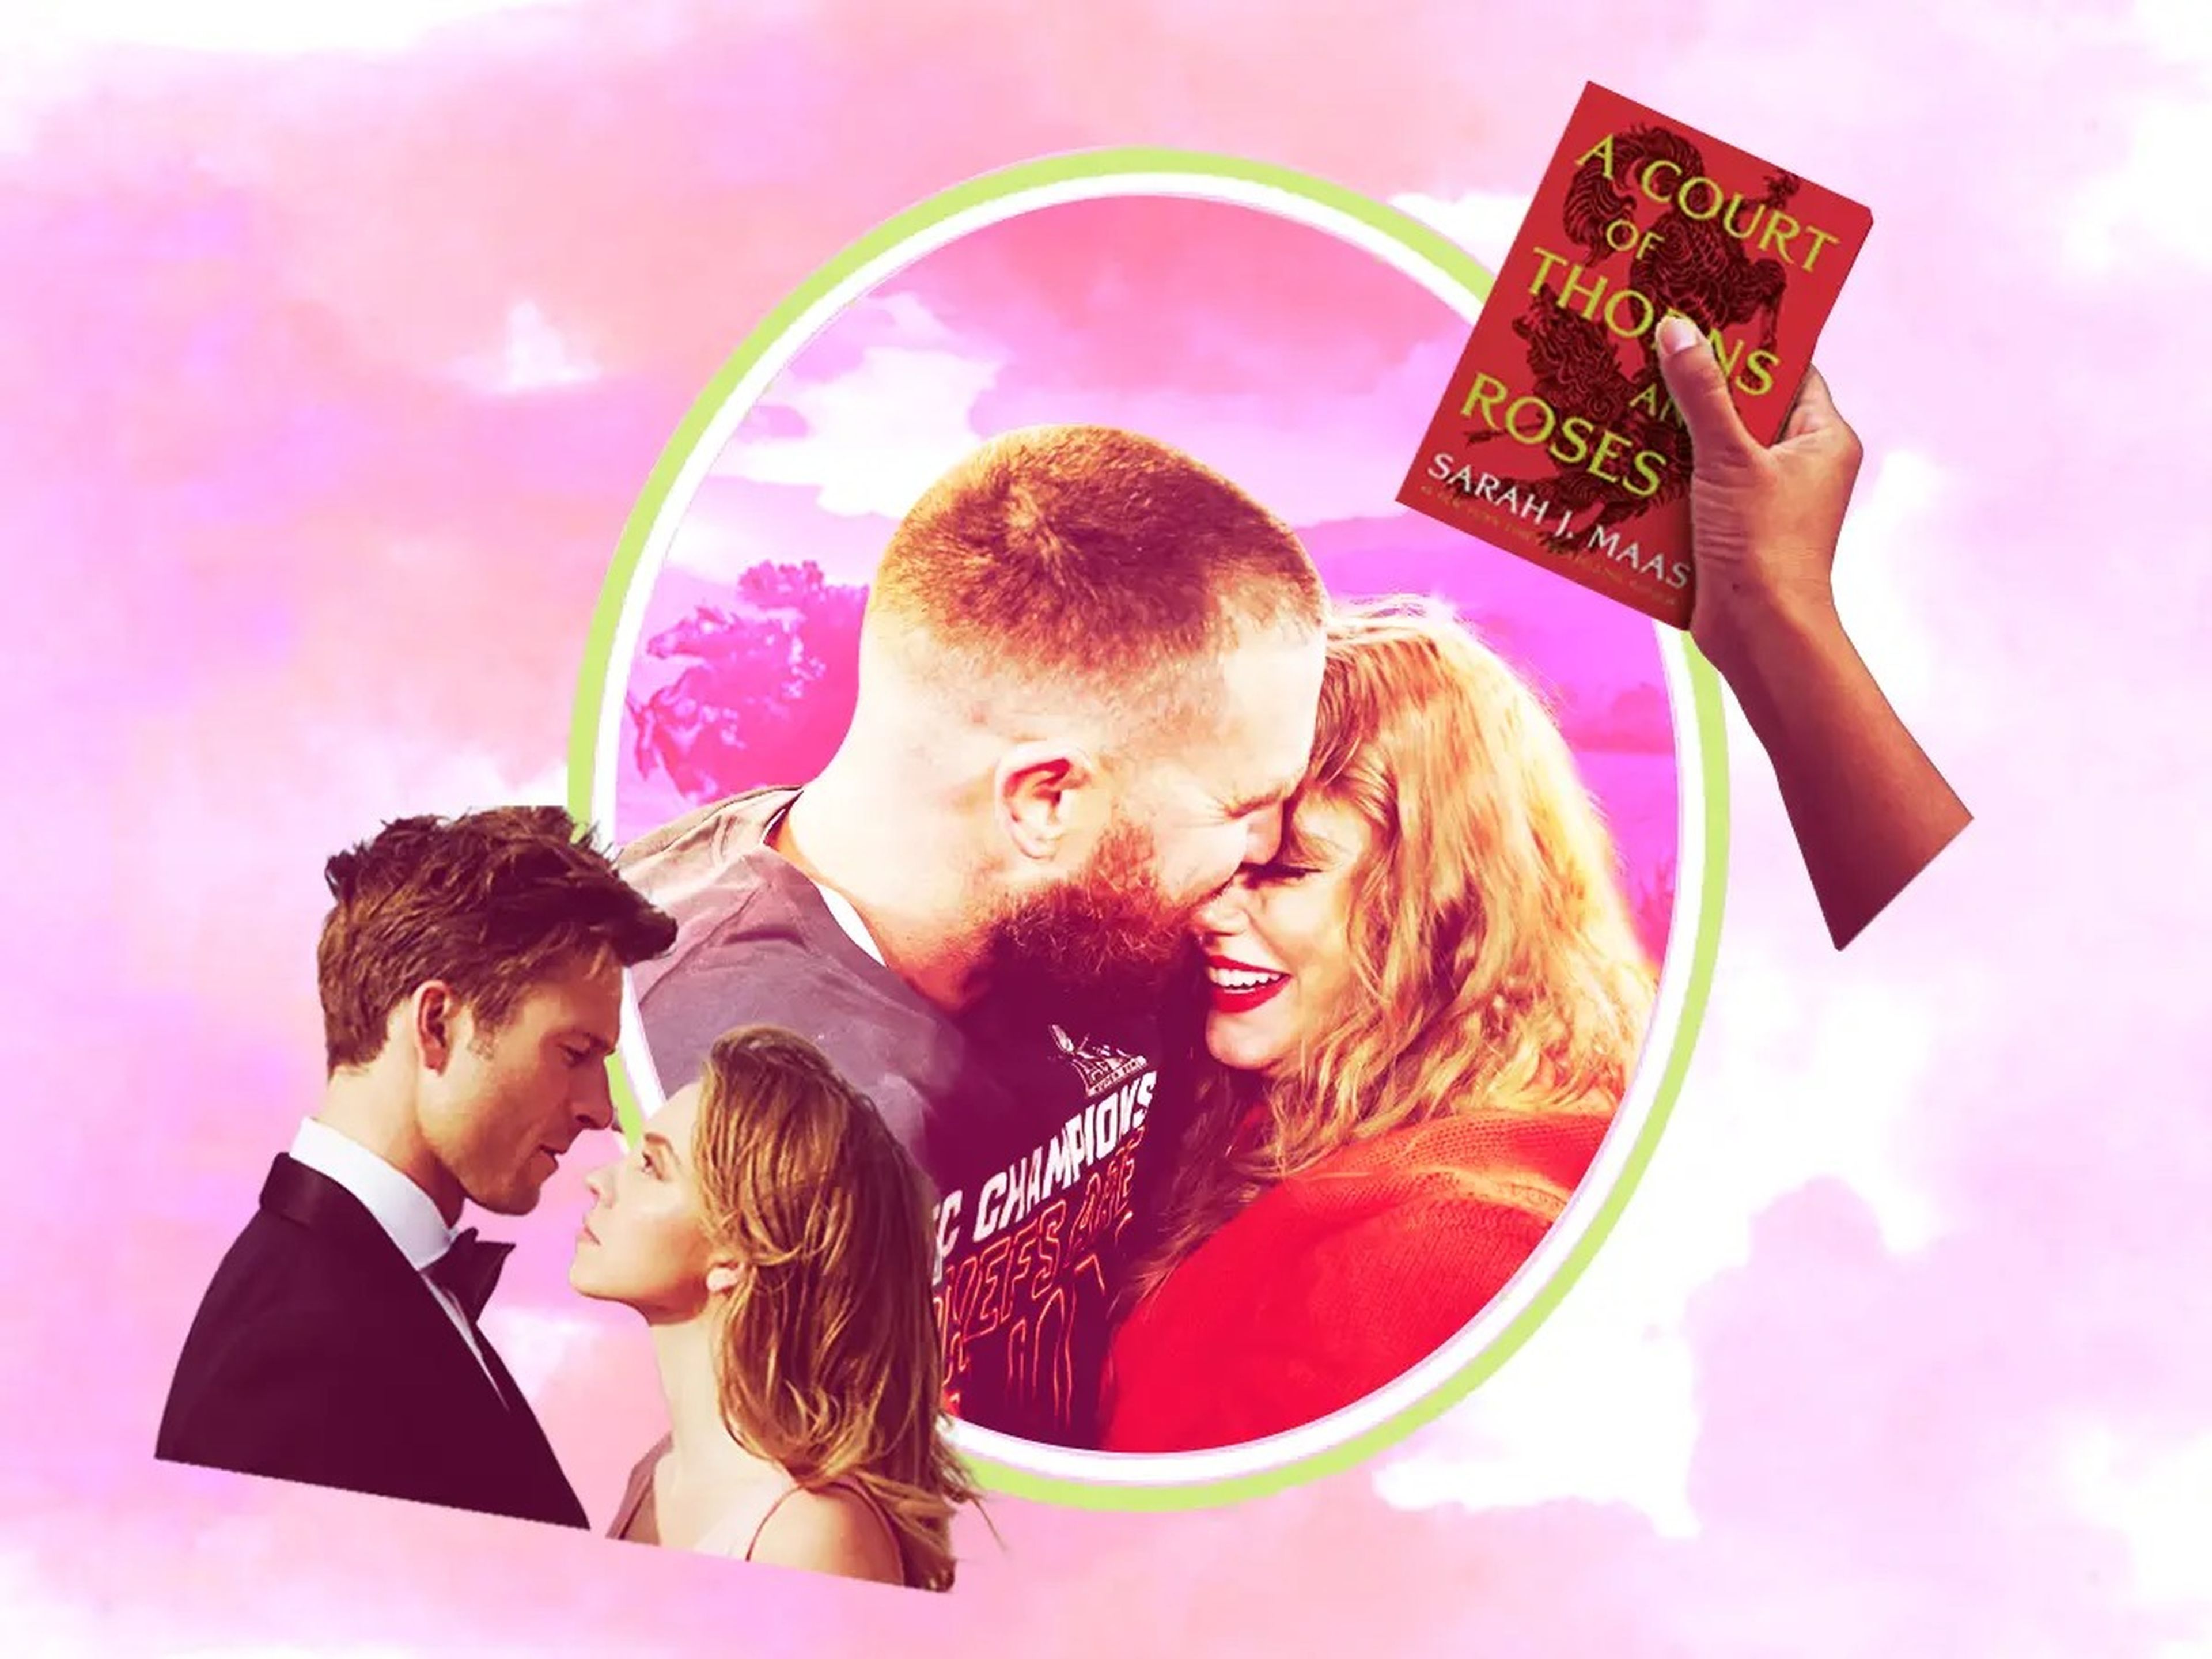 Collage on a pink watercolor background featuring images of Taylor Swift and Travis Kelce, actors from the rom-com movie "Anyone But You," and a hand holding the book "A Court of Thorns and Roses."